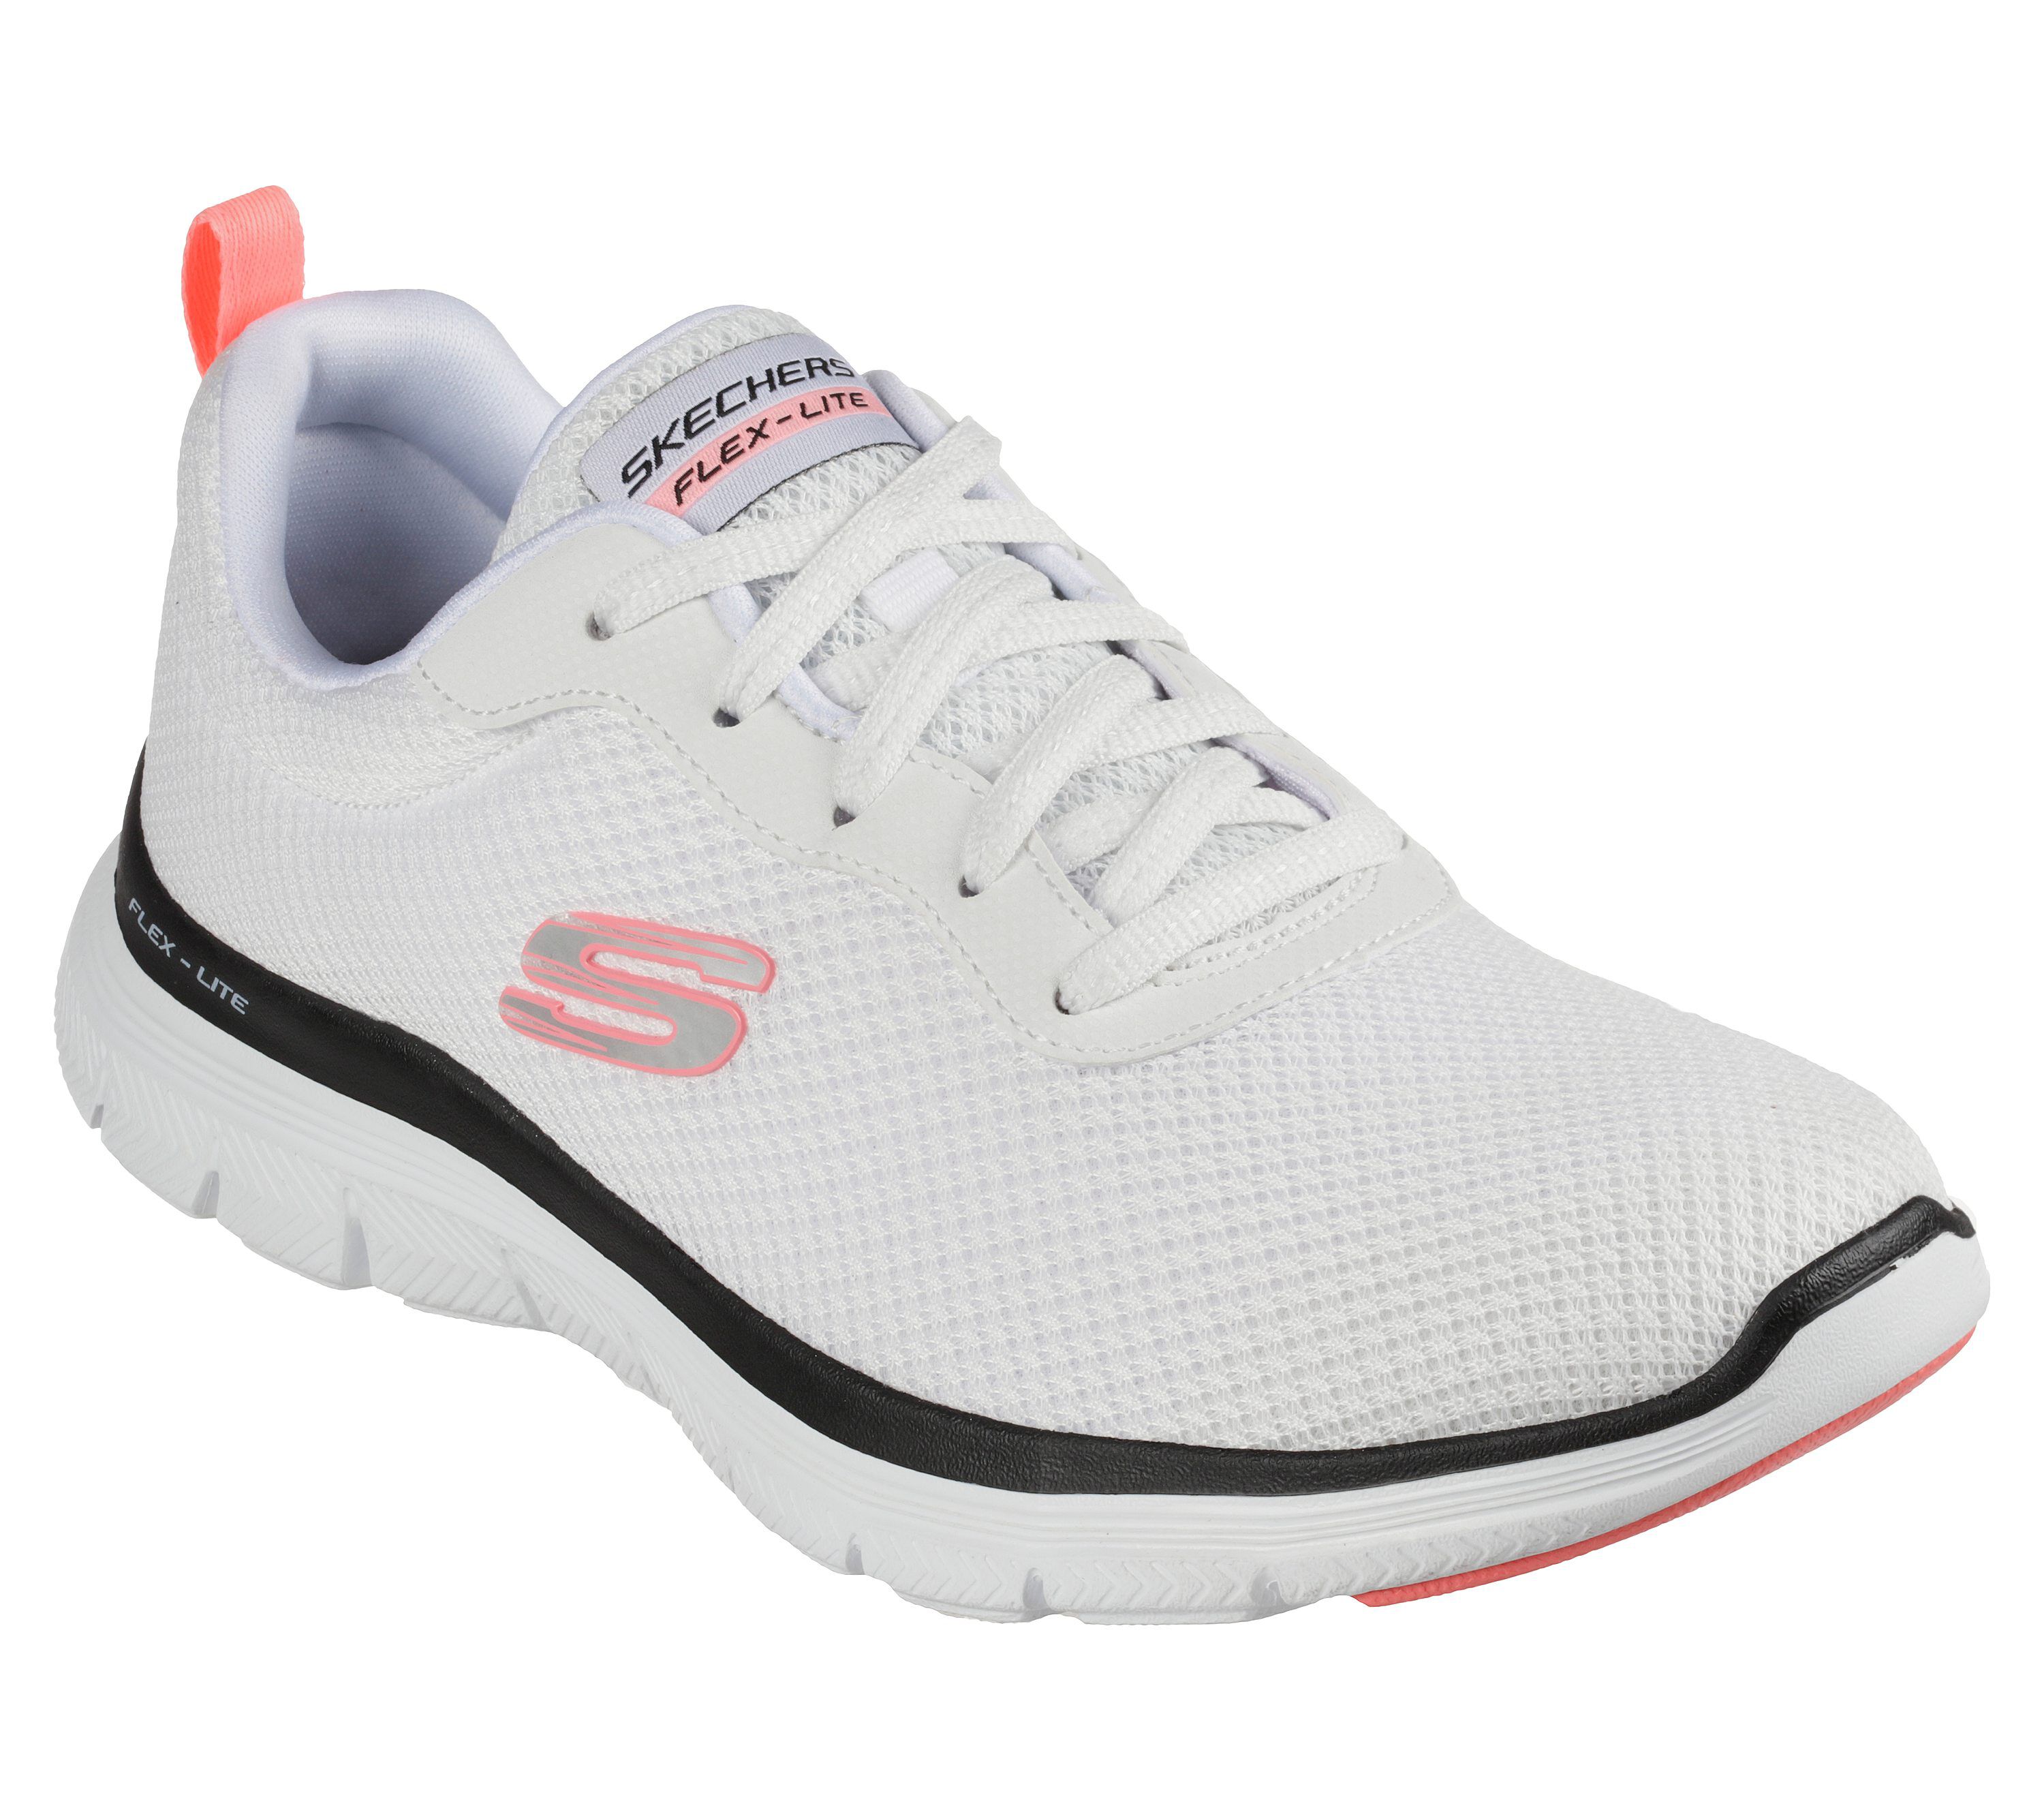 skechers performance shoes